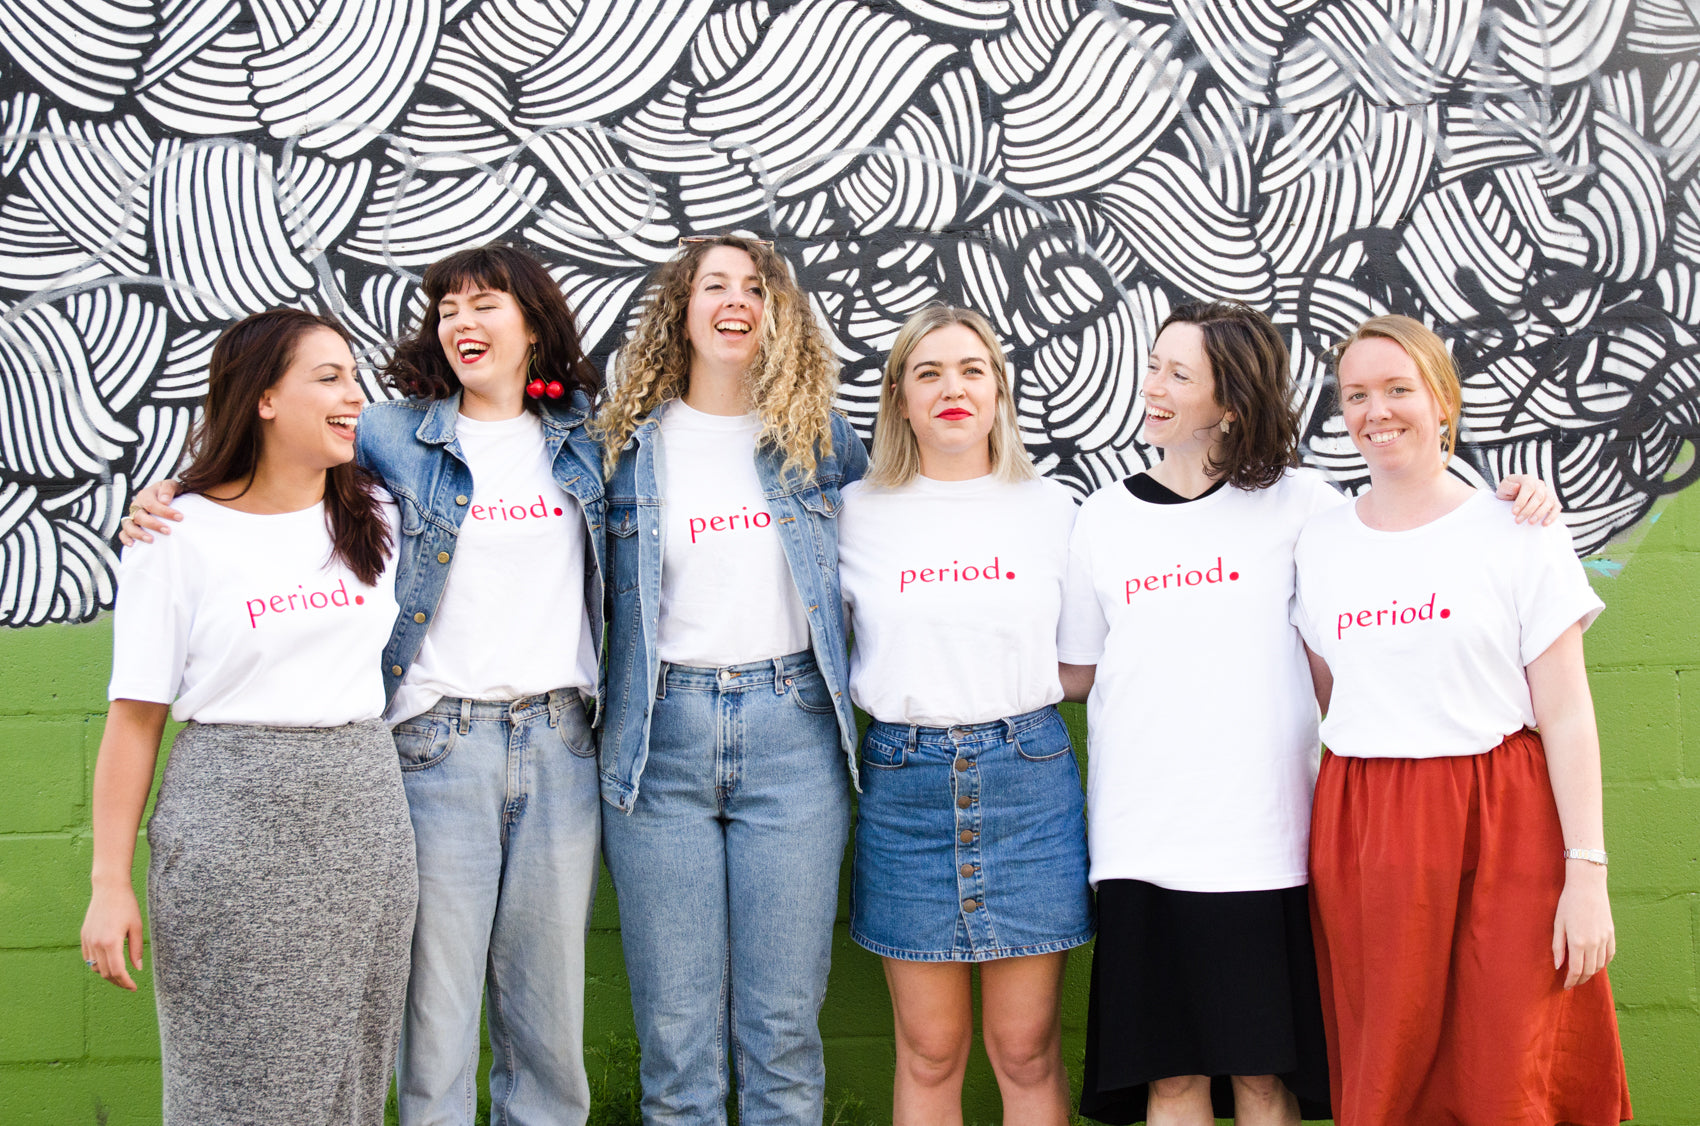 The family of Period Poverty initiatives: How to Donate and Get Involved